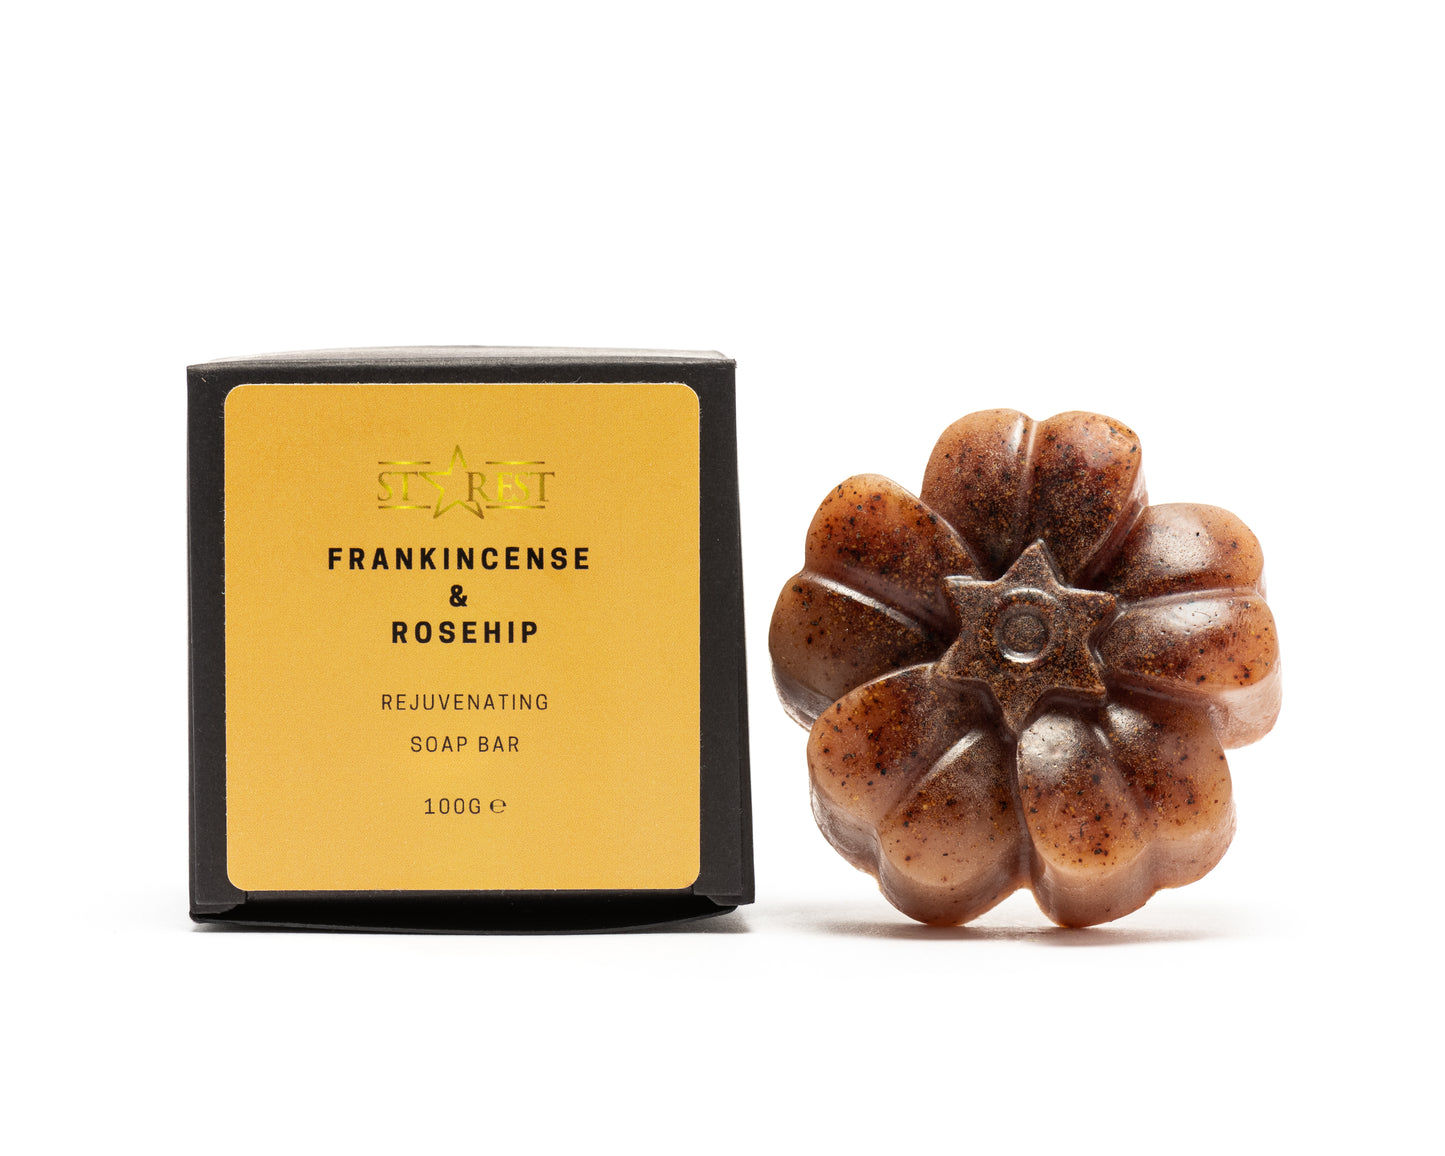 Frankincense and Rosehip Soap